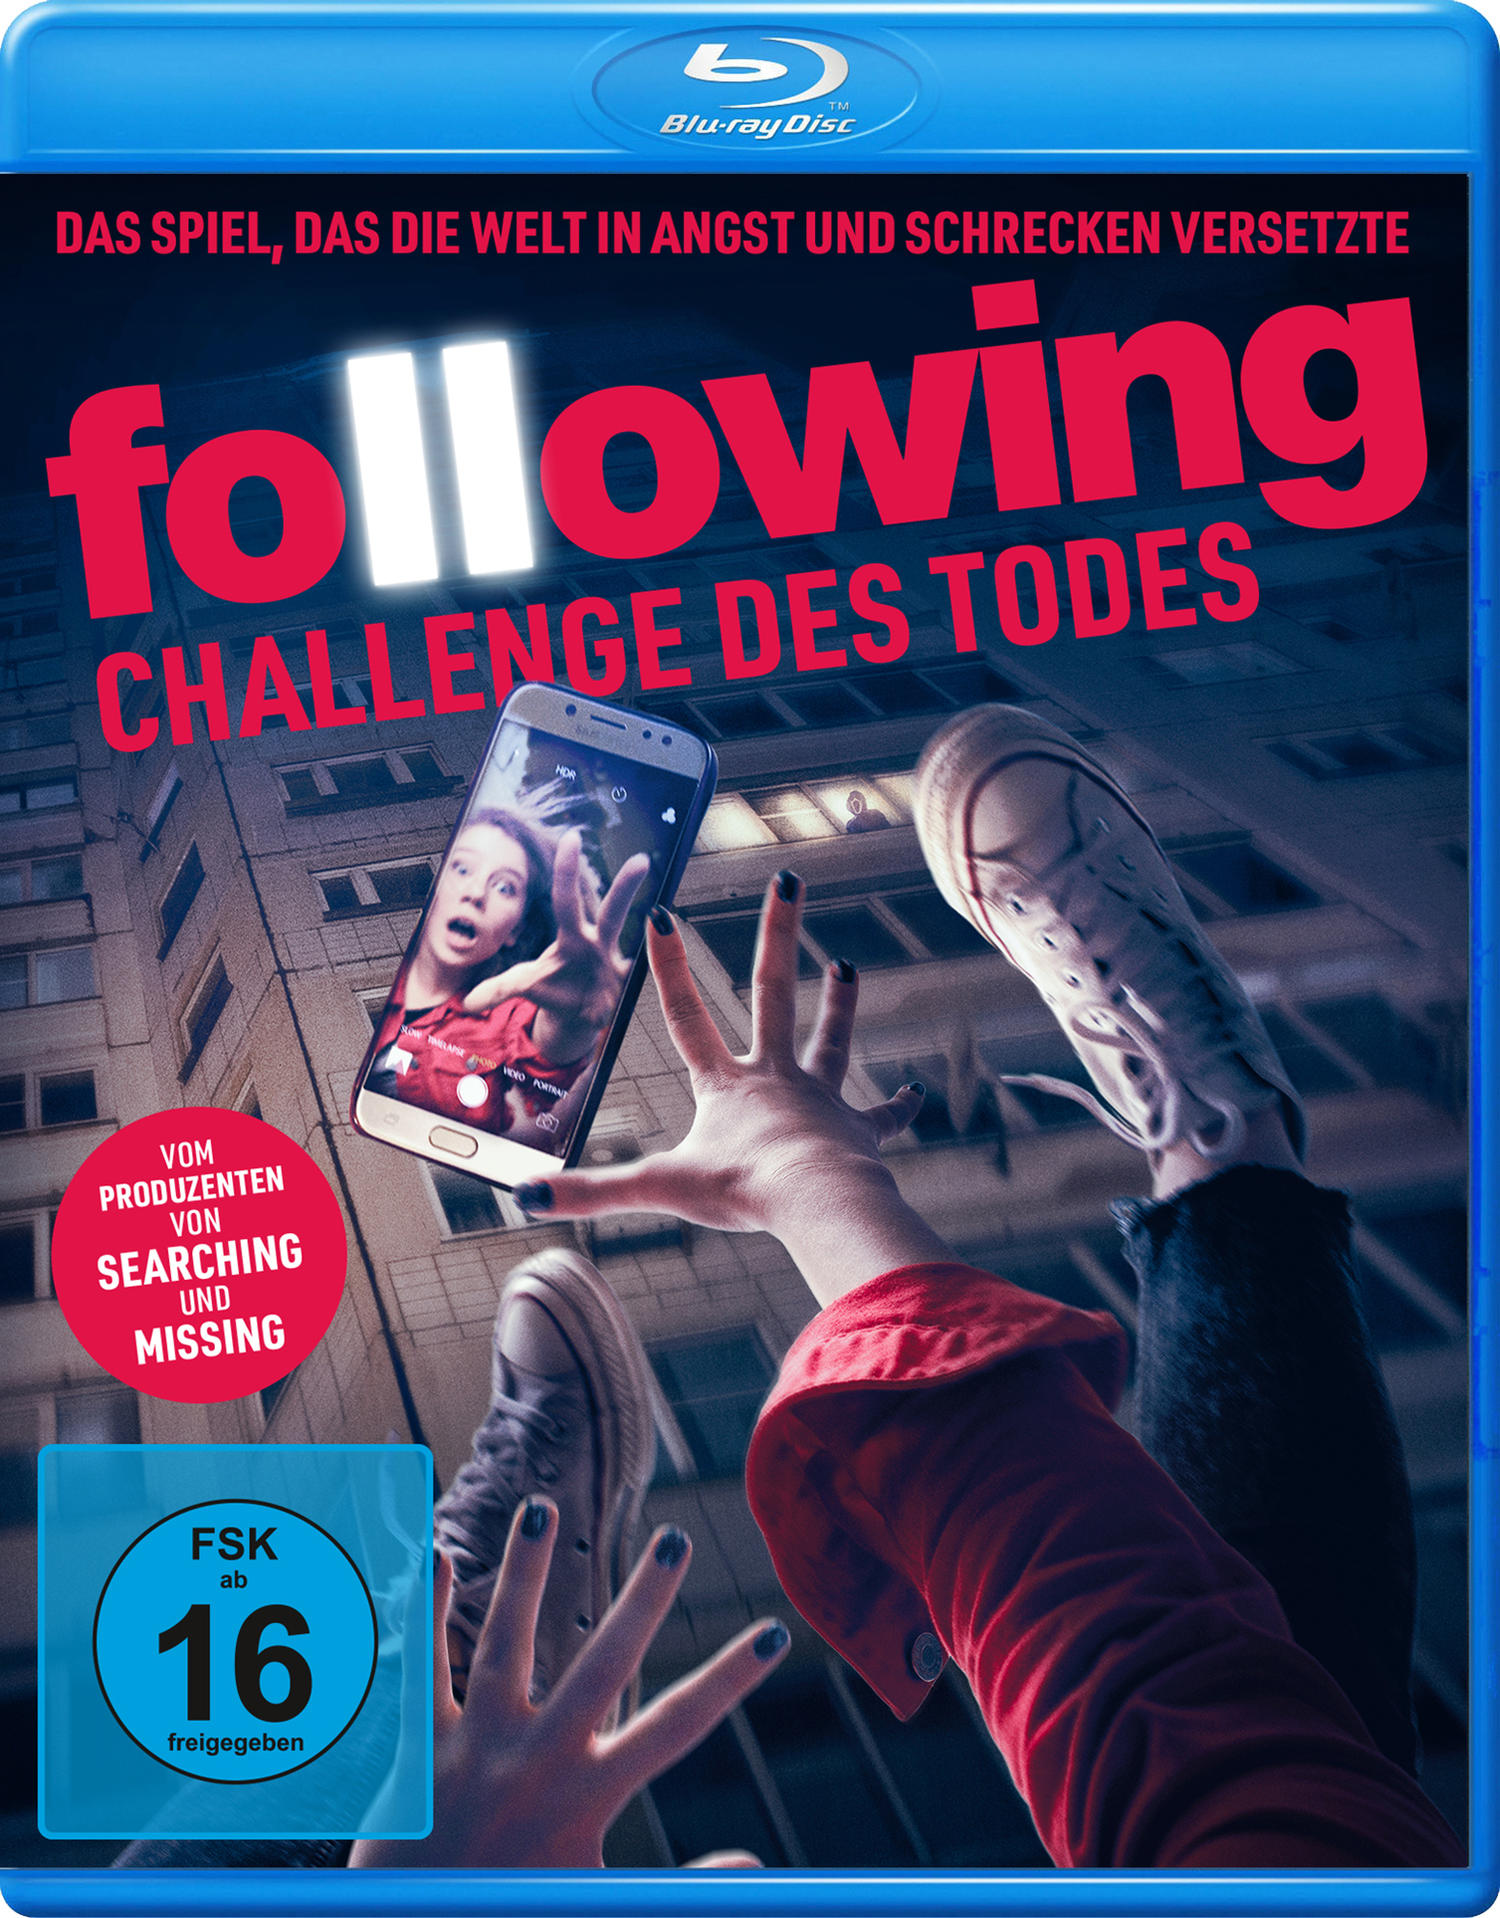 Challenge Blu-ray des Todes following -